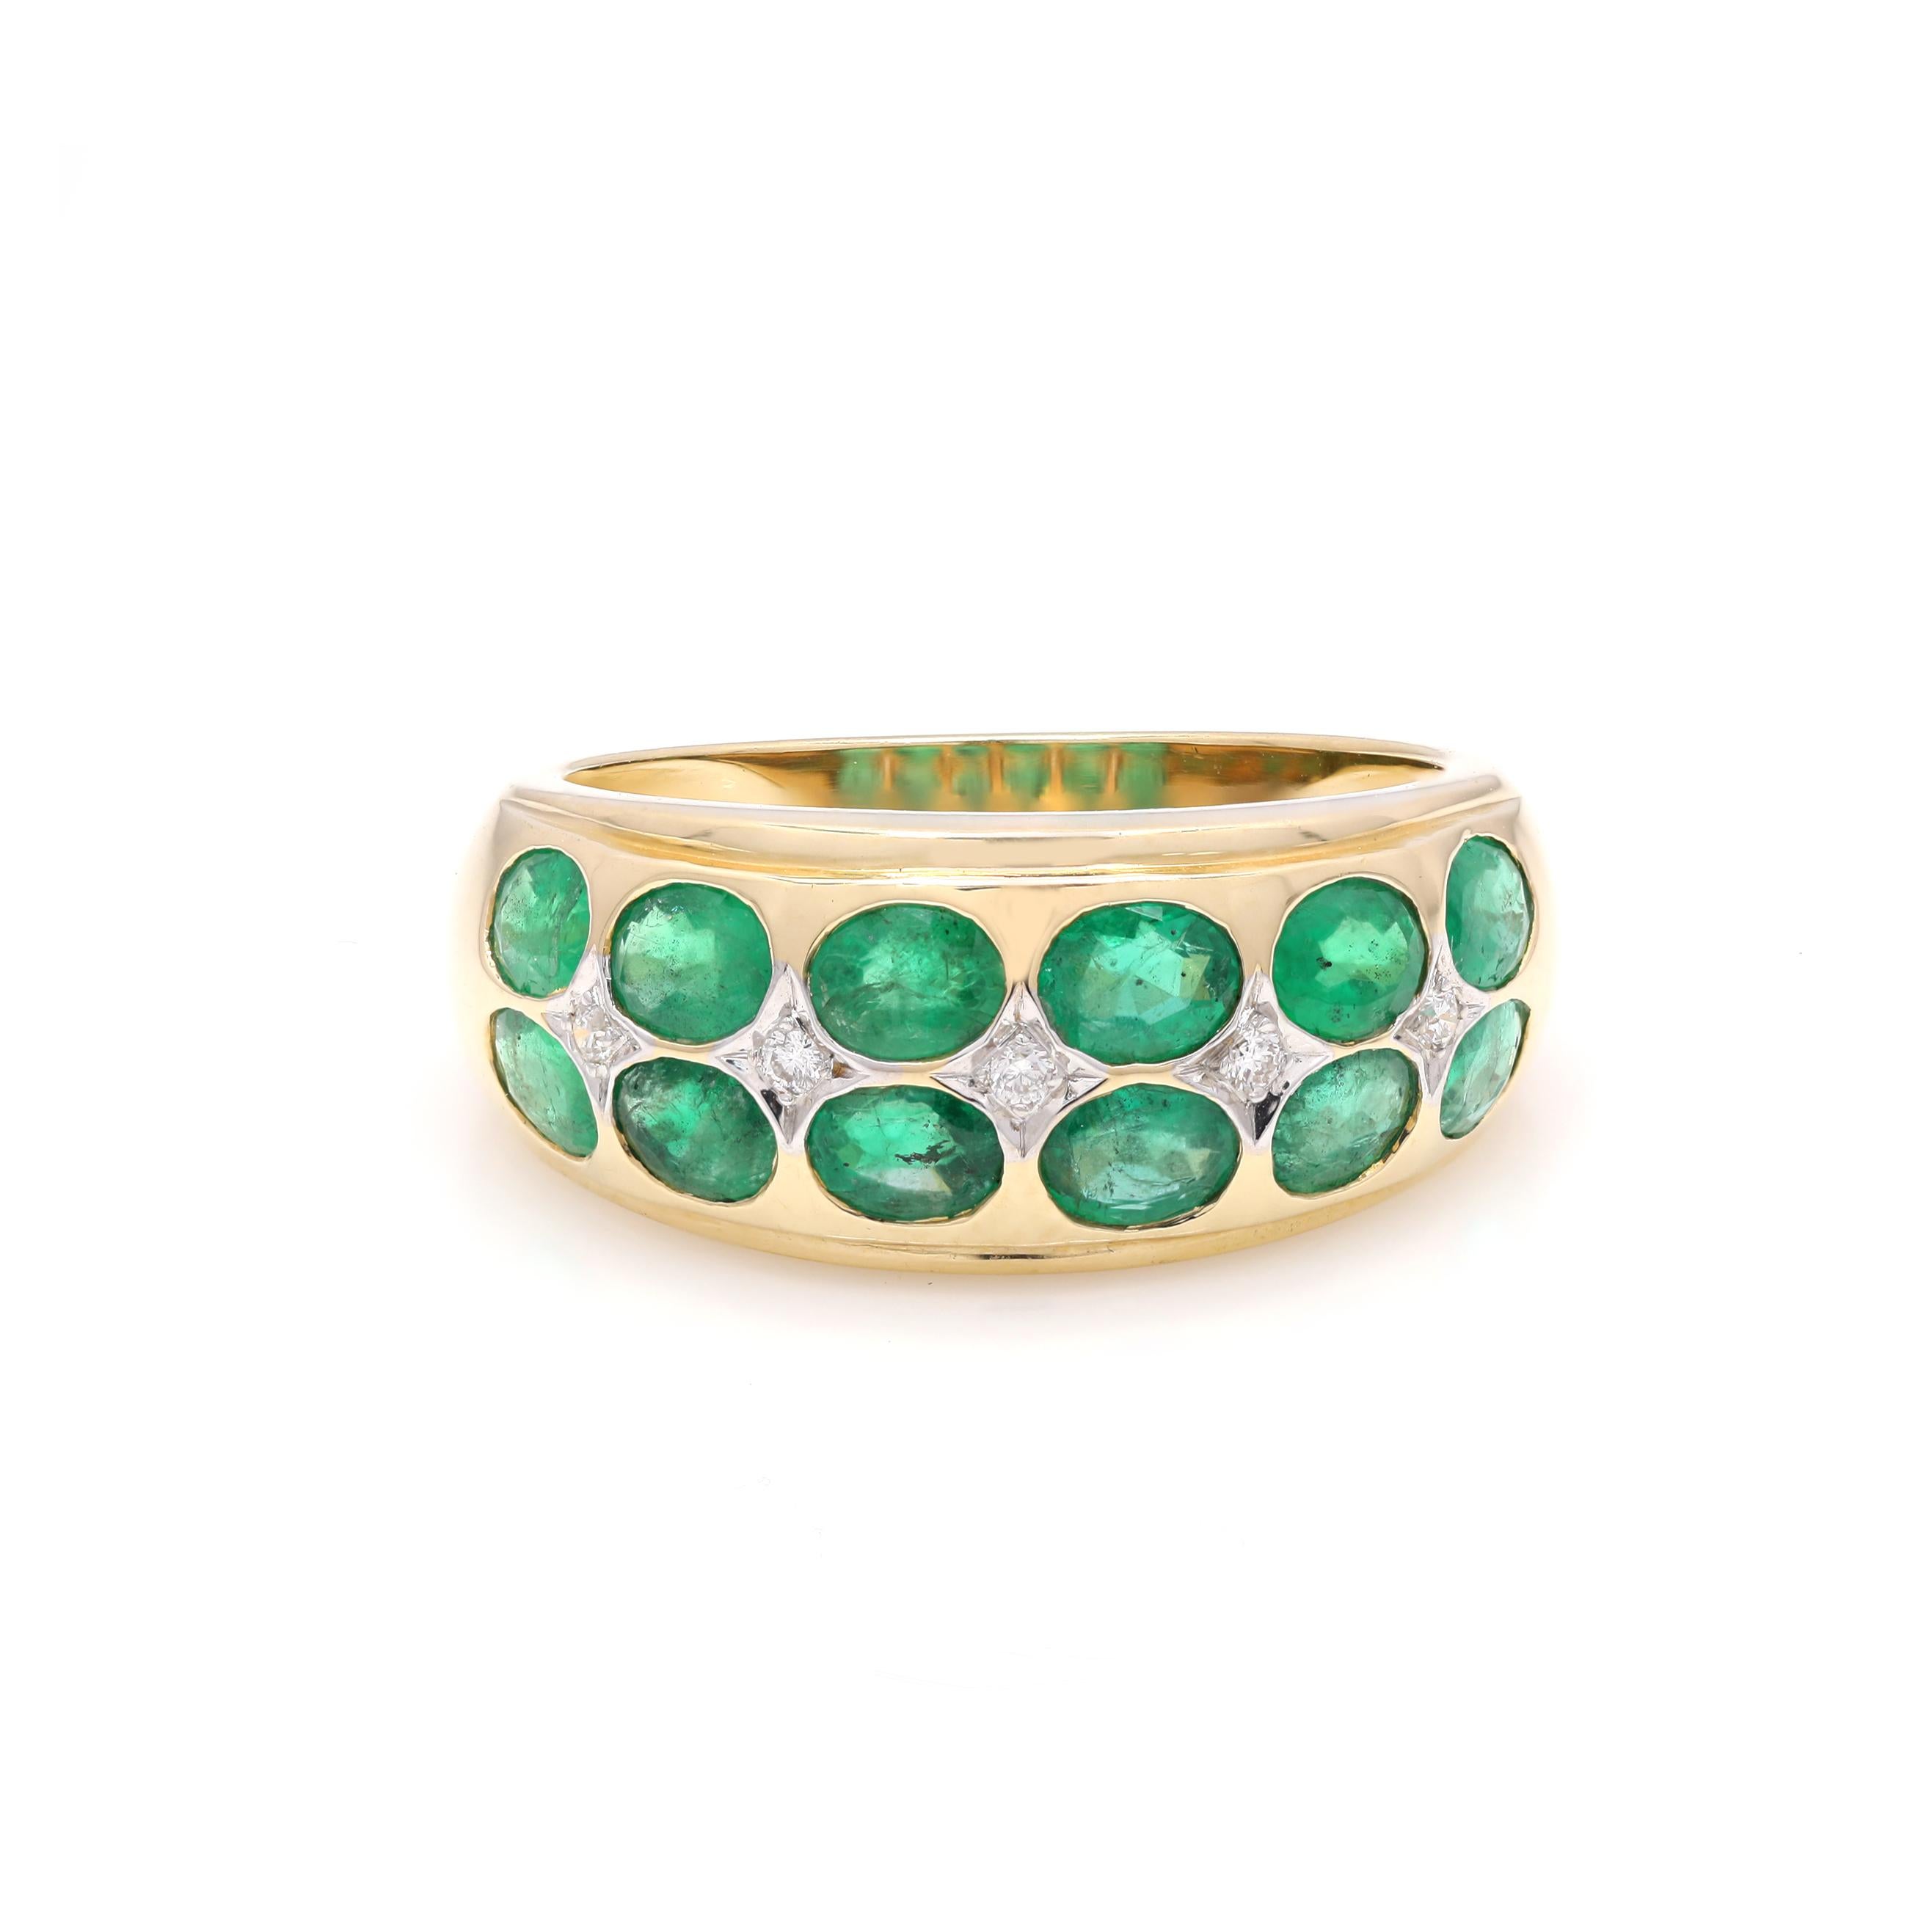 For Sale:  Natural 2.3 ct Emerald Band Ring with Diamonds Inlaid in 14K Yellow Gold 3